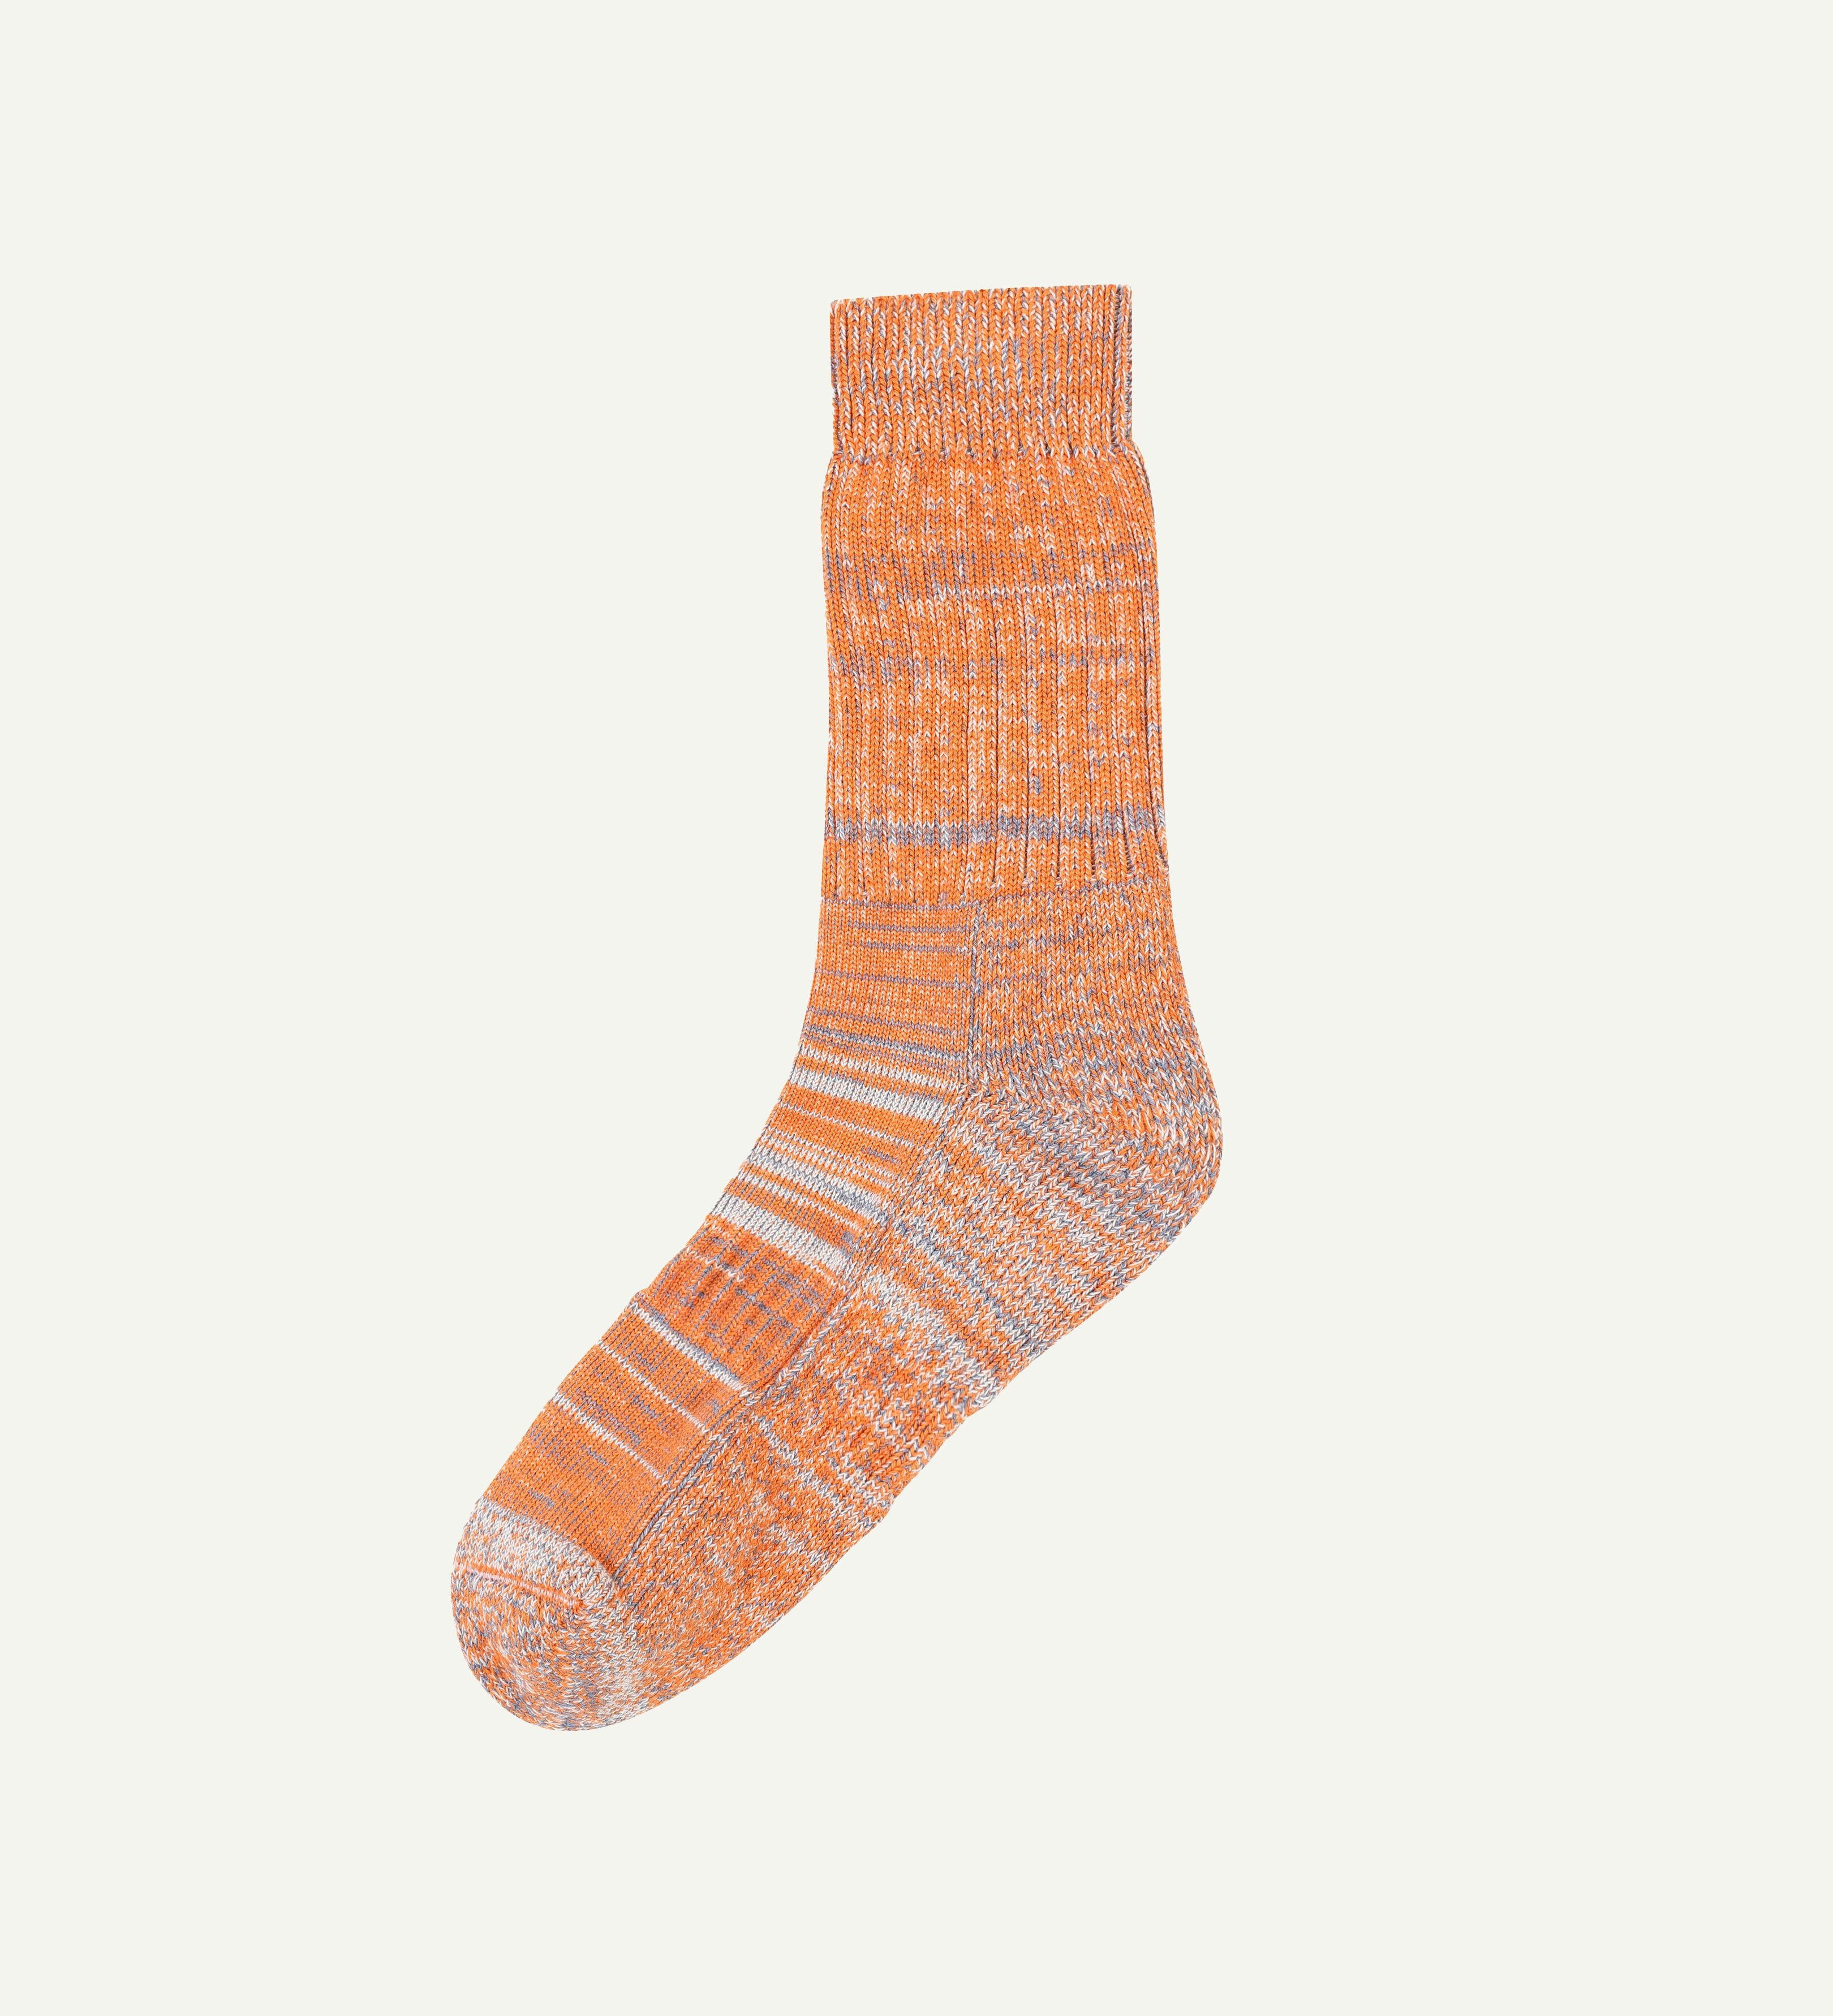 Flat view of Uskees 4006 gold mix organic cotton sock, showing bands of gold-orange, grey and beige.